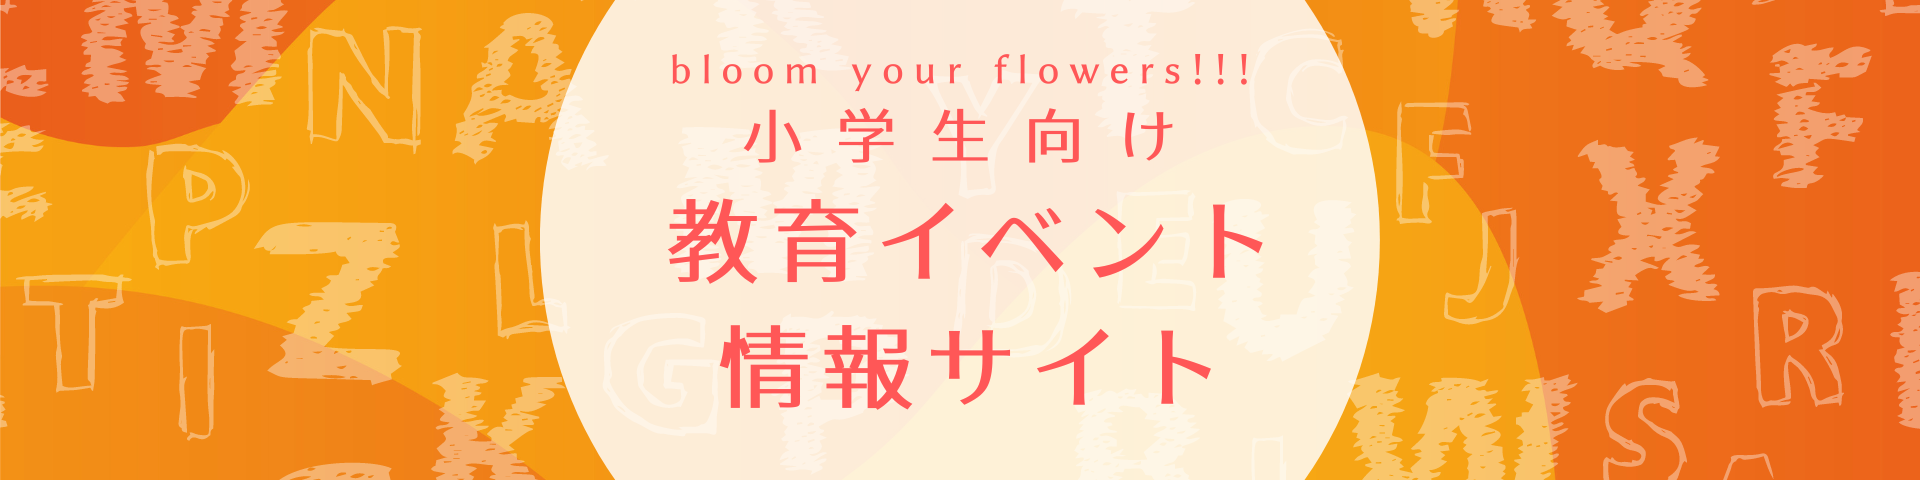 Bloom your flowers!!!